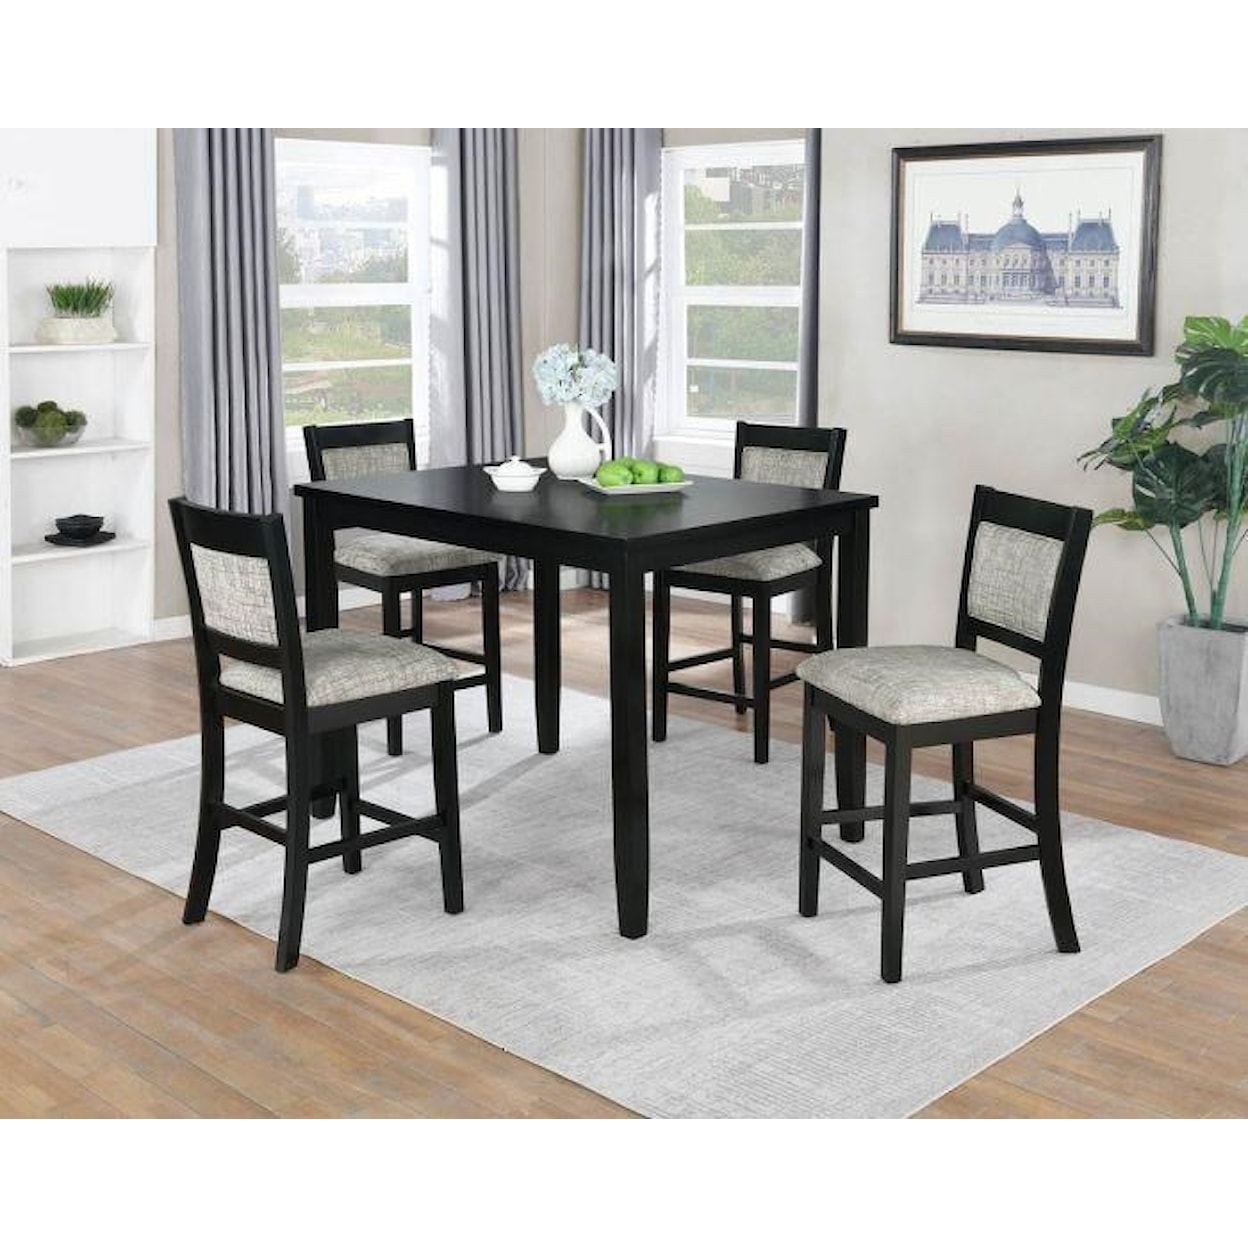 Vilo Home Jazzy Bells Dining 5-Piece Sets